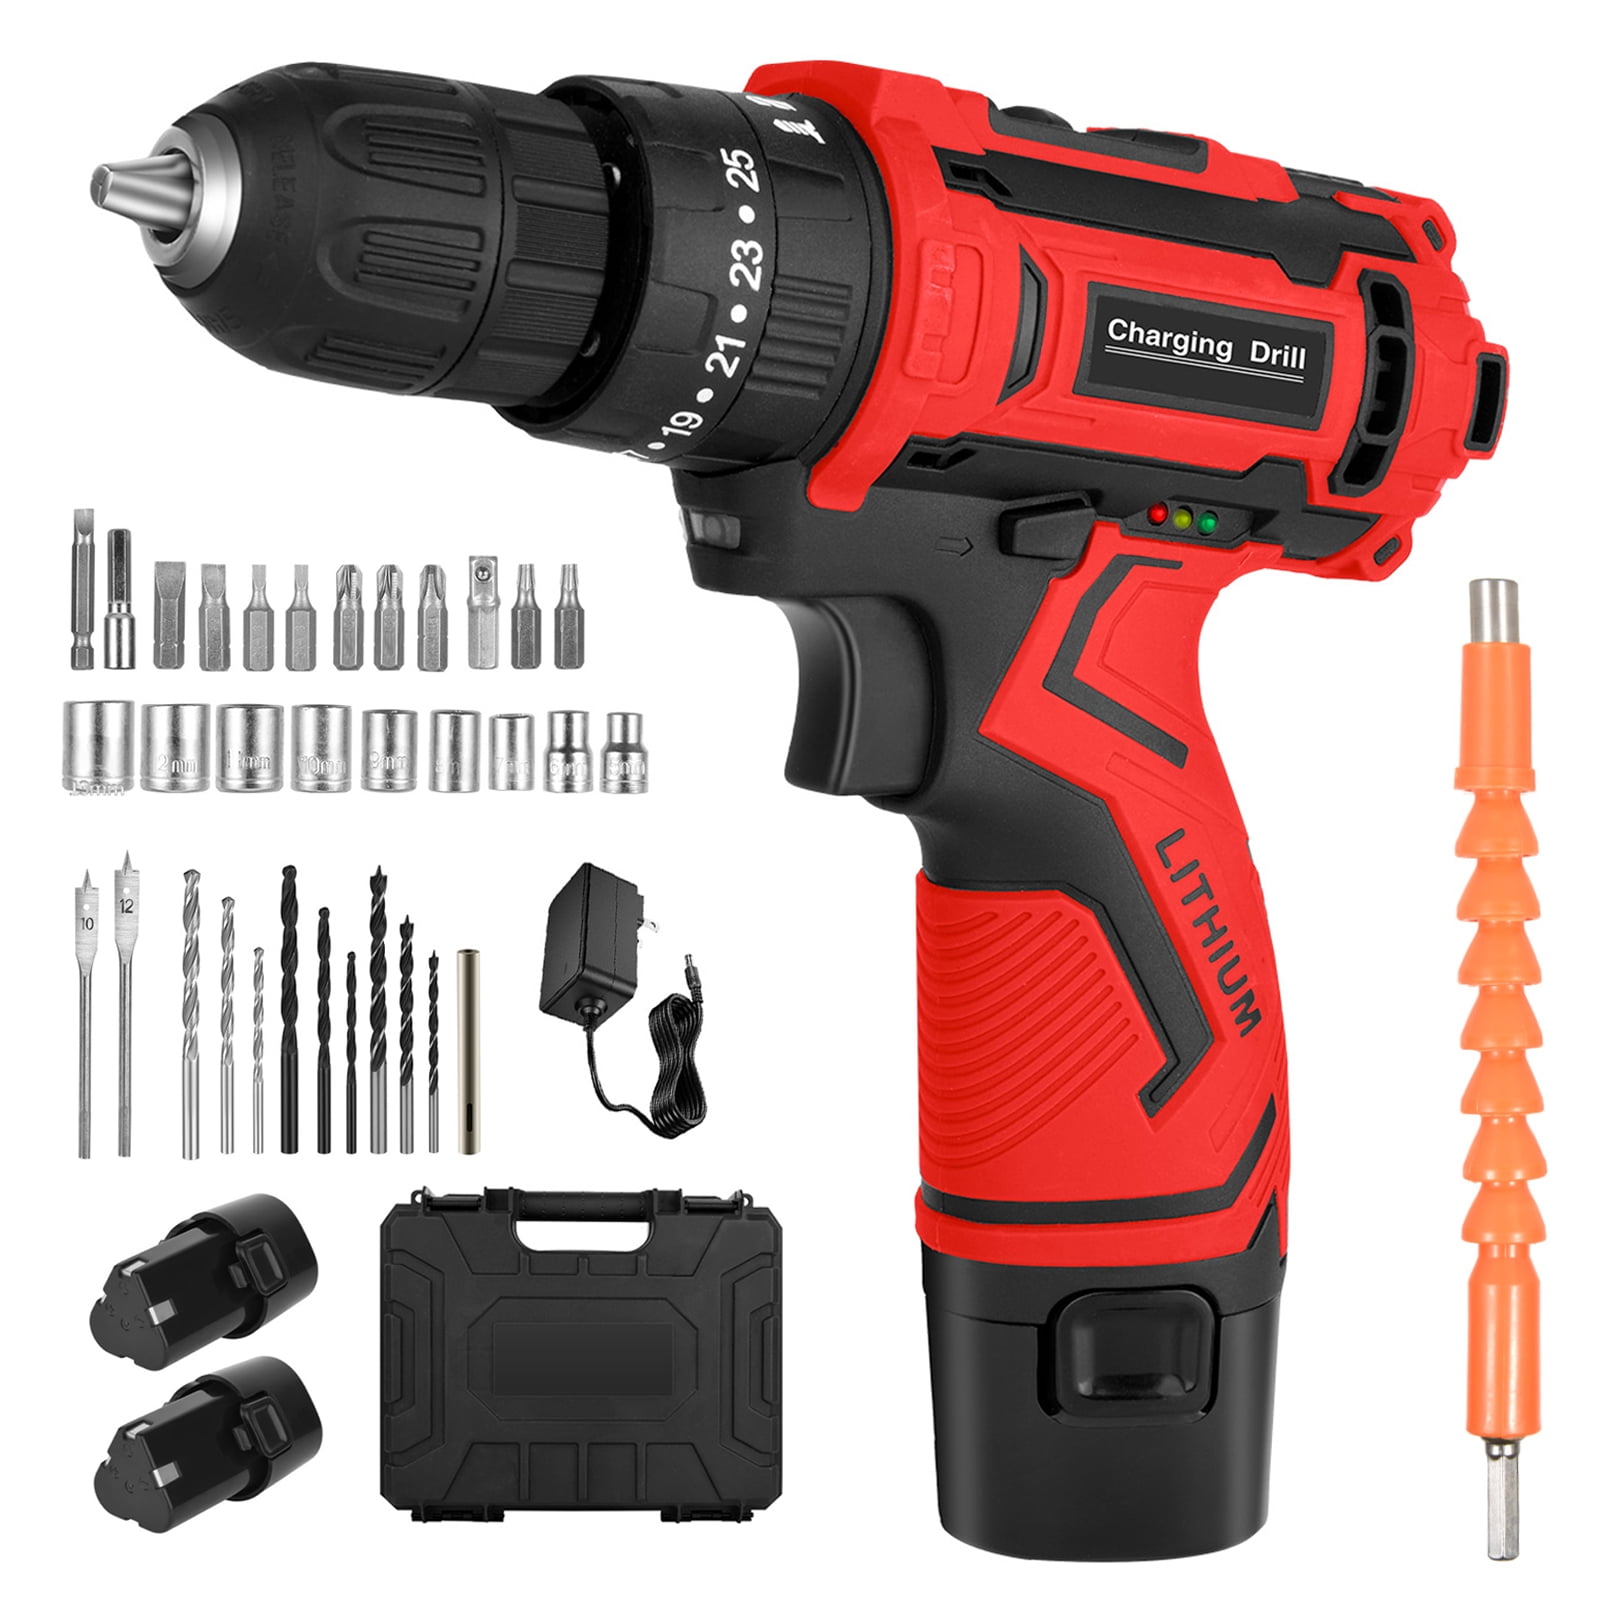 Hilda 12V Cordless Drill with 21 Pcs Drill Set, 1300mAh Lithium-Ion Cordless Electric Screwdriver 3/8 inch with Storage Bag and LED Light, 2 Variable